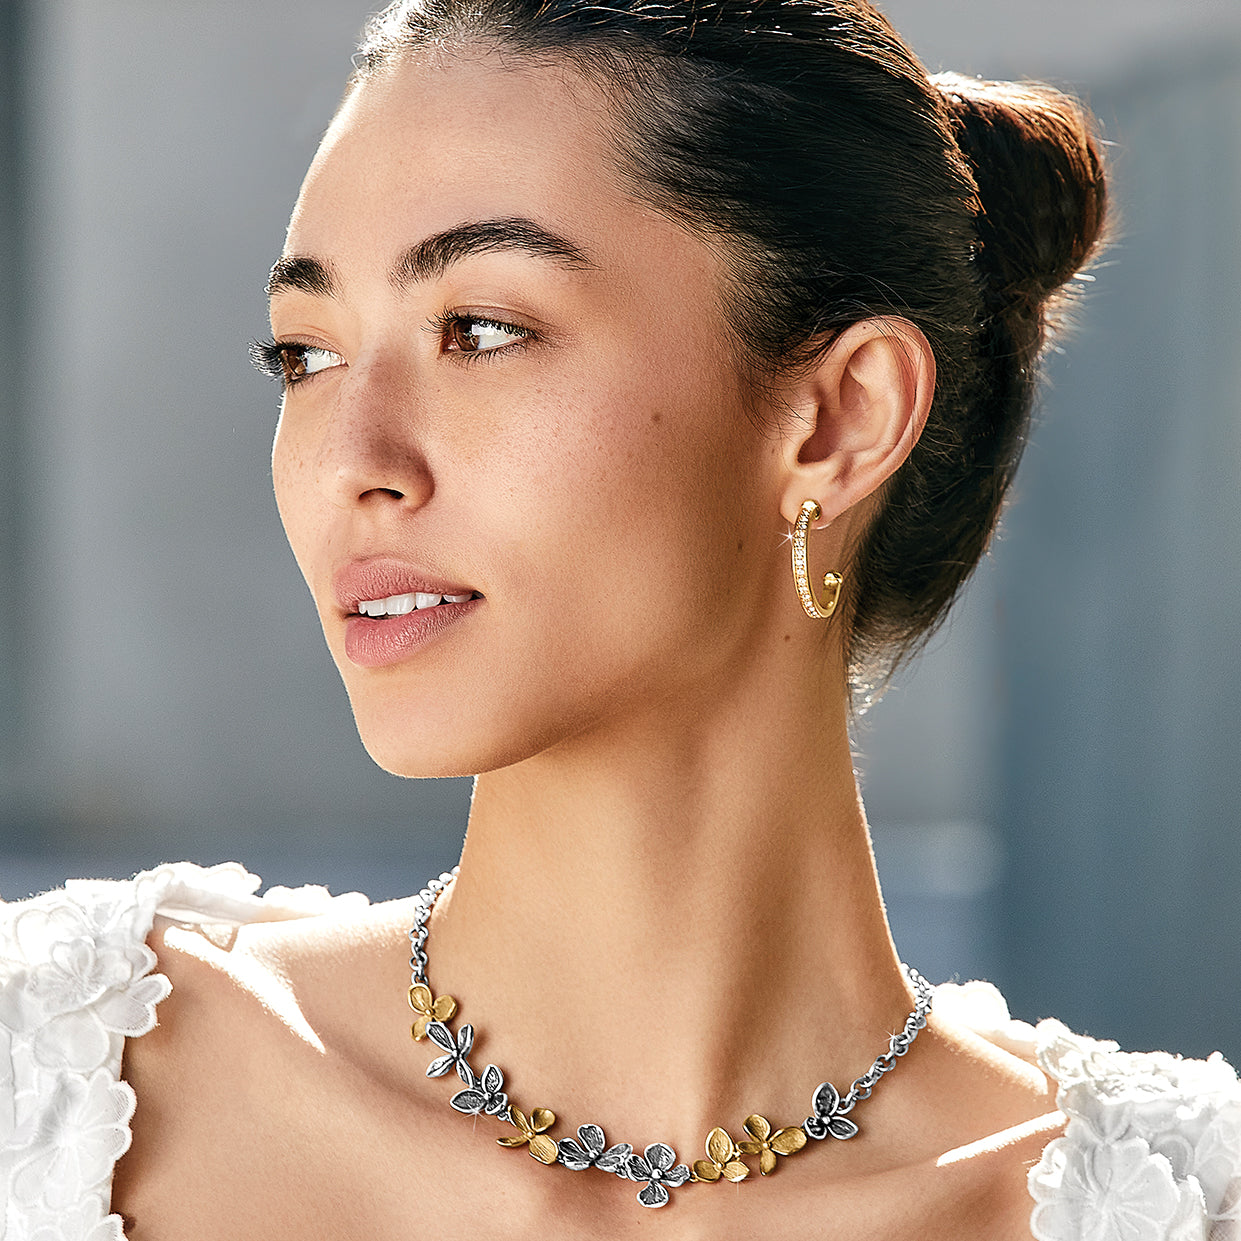 Model wearing Everbloom necklace